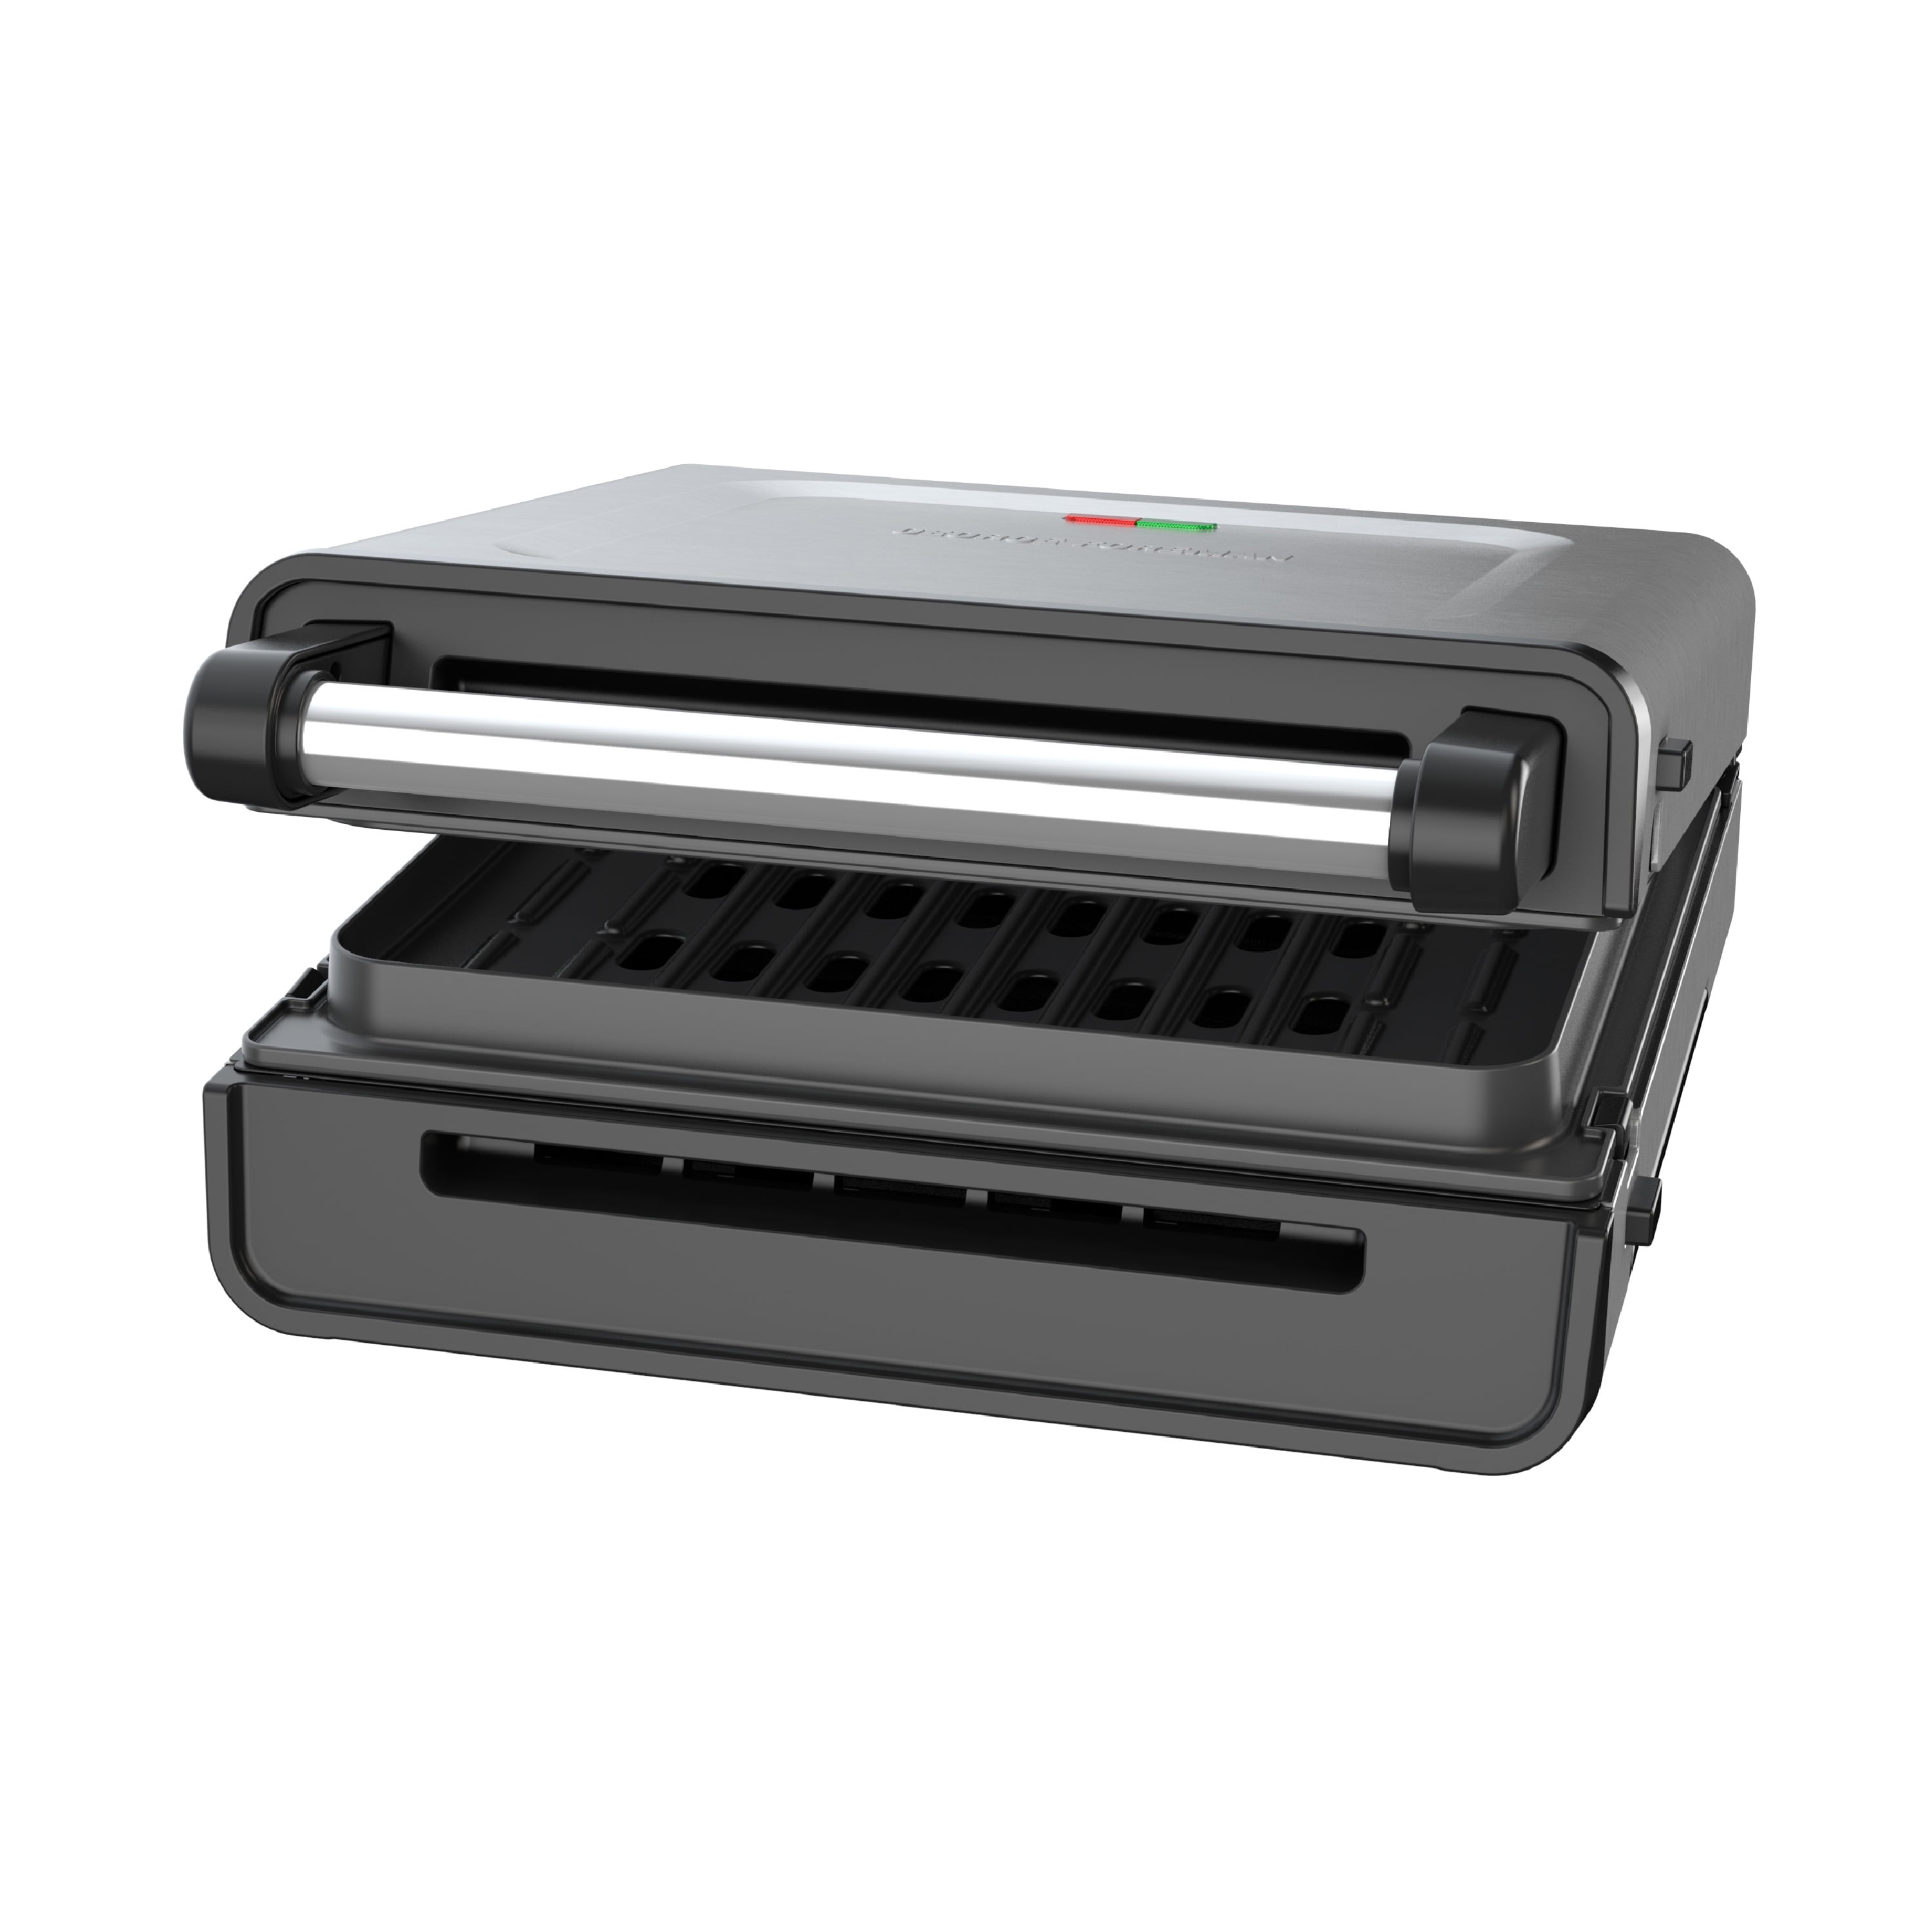 George Foreman Smokeless Grill Series, Party Size, 172 sq in